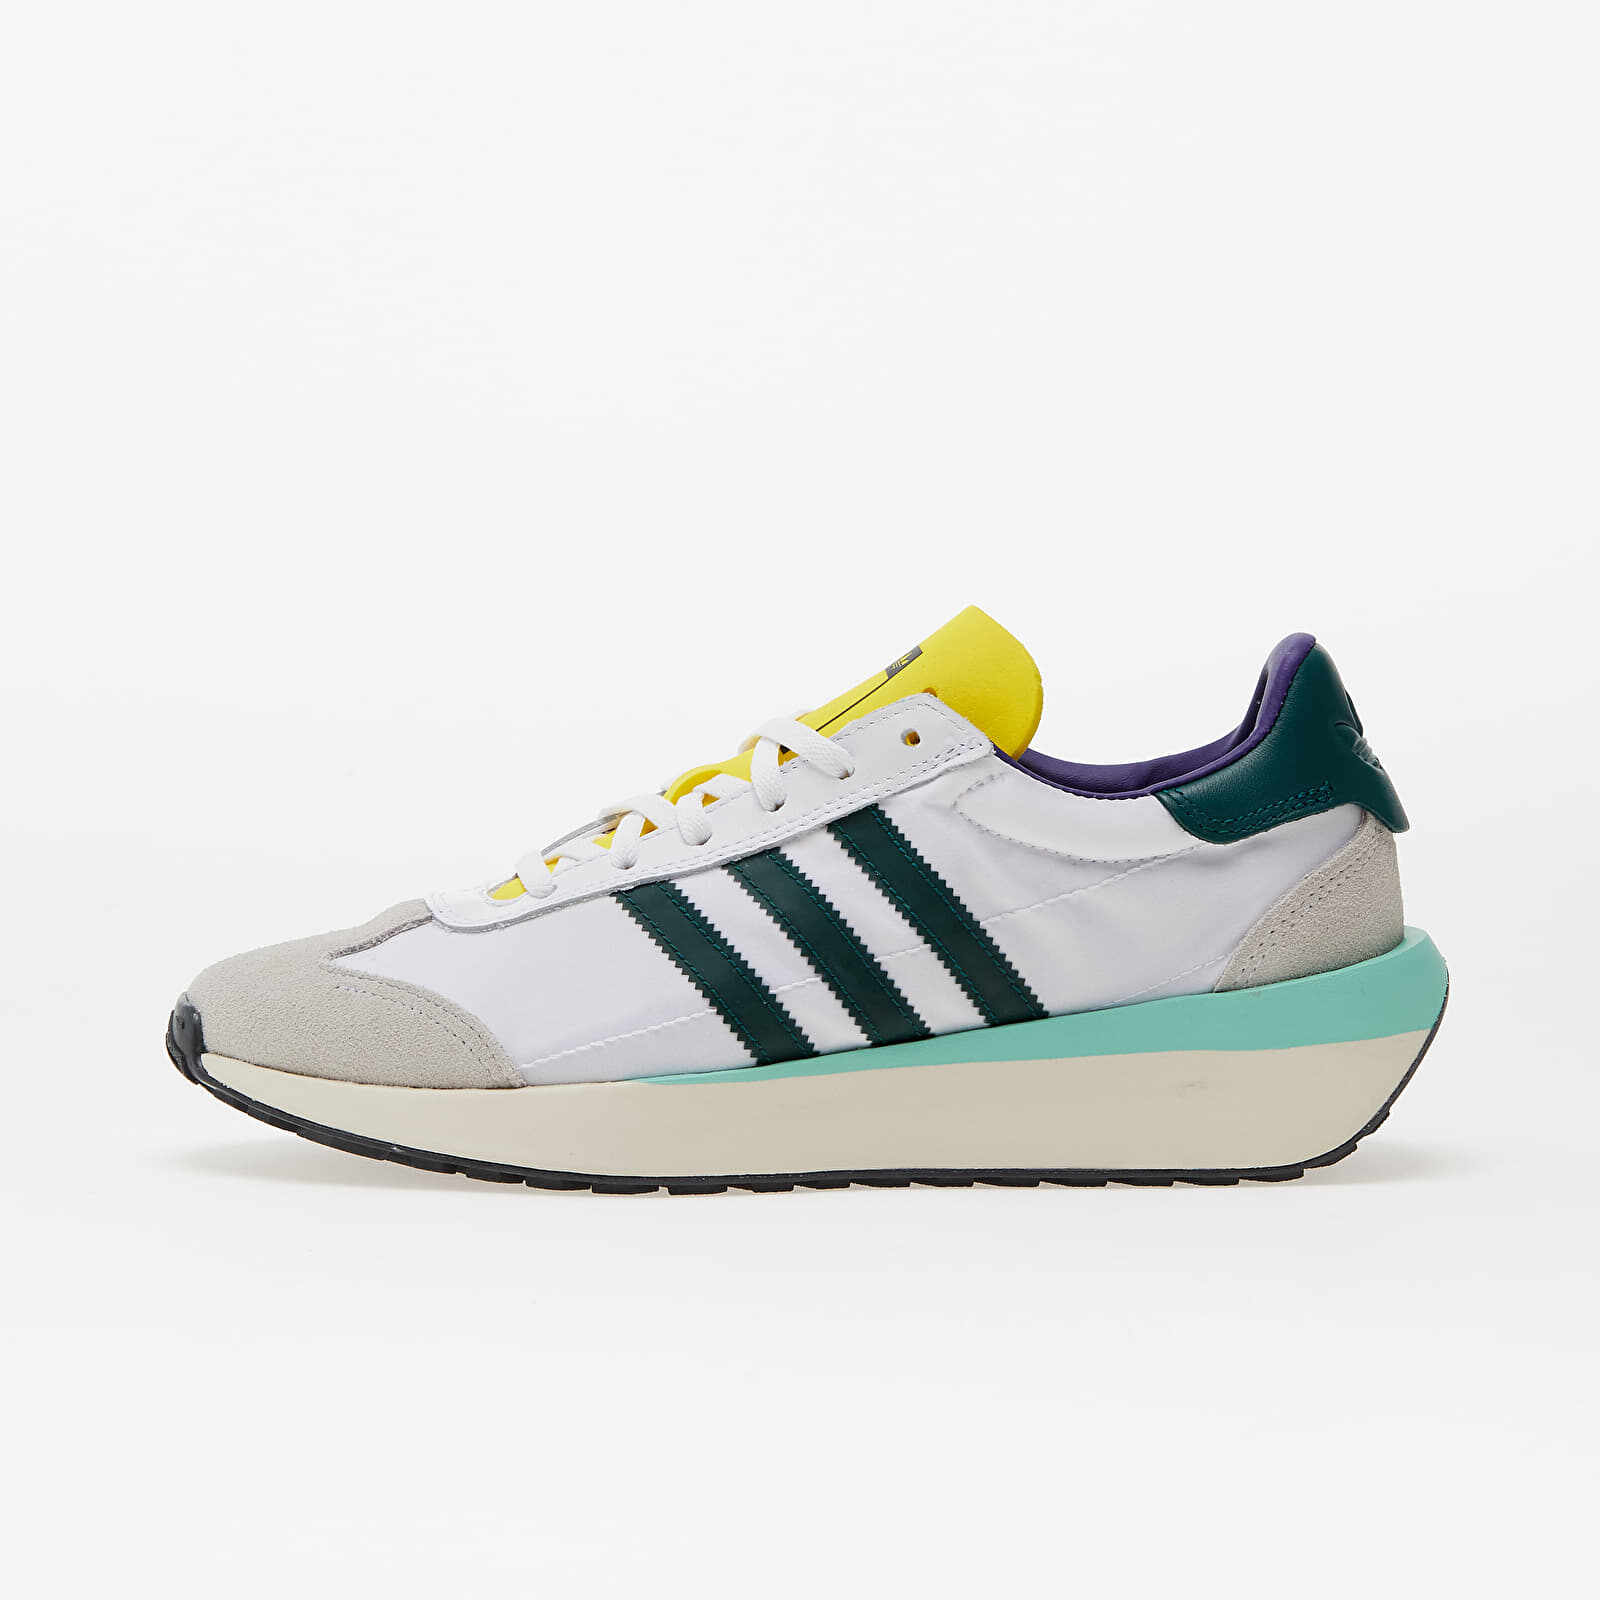 adidas Country Xlg Ftw White/ Collegiate Green/ Yellow